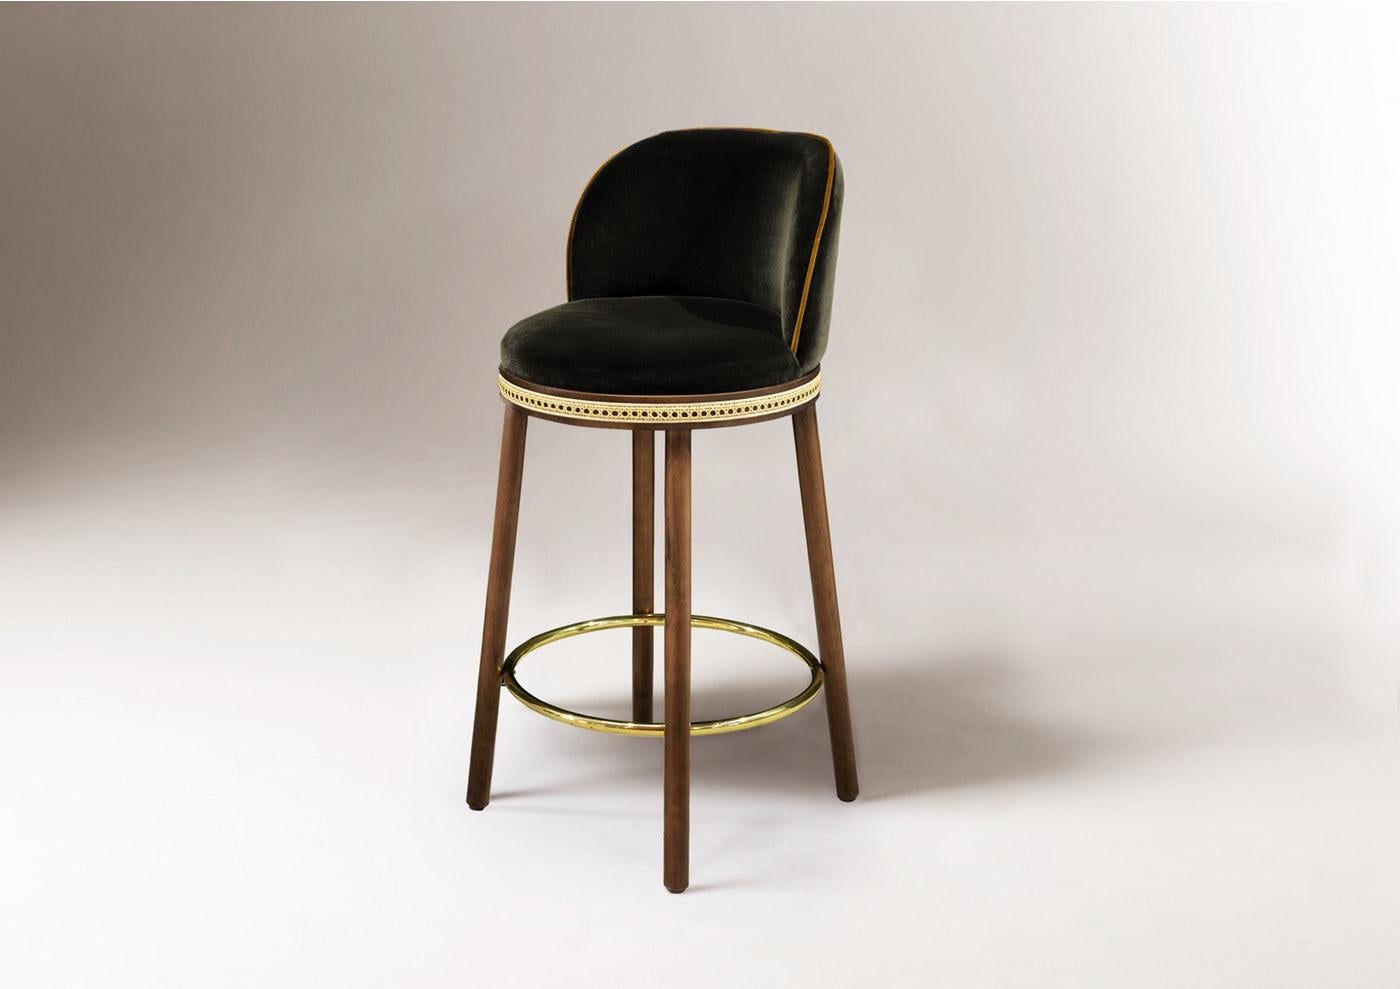 Bar chair - Alma by Dooq 
Dimensions:
W 46 cm 18”
D 51 cm 20”
H 100 cm 39”
seat height: 75 cm 30”
Materials: upholstery fabric or leather; structure solid wood feet lacquered MDF or solid wood rattan natural rattan. COM with natural walnut or